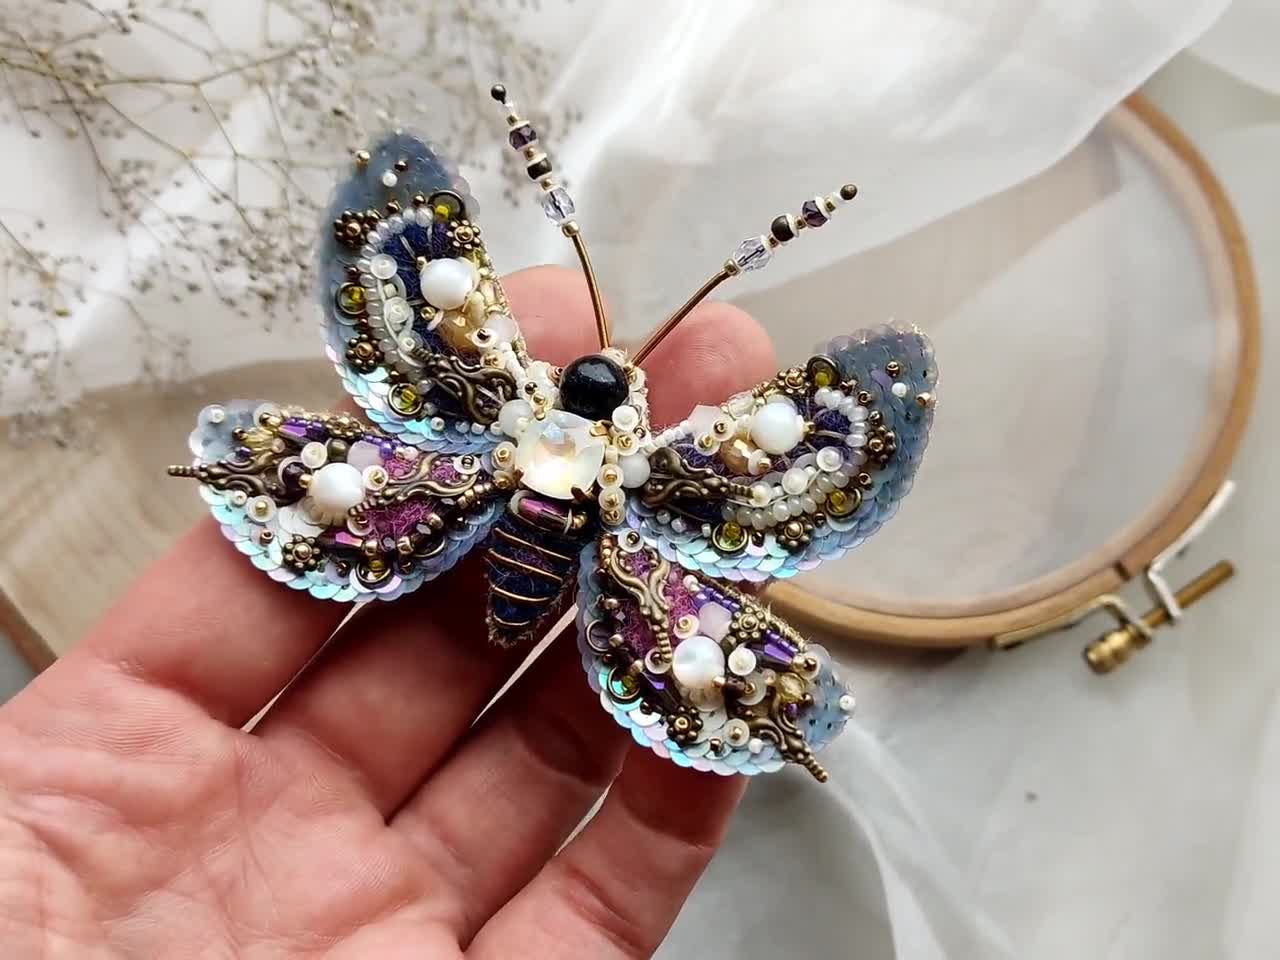 Crystal Butterfly Transparent Wings Rhinestone Insect Shawl Pins Clips  Bridal Accessory Crafts Jewelry Corsage Wedding Animal Women's Brooch, Brooch  Pins